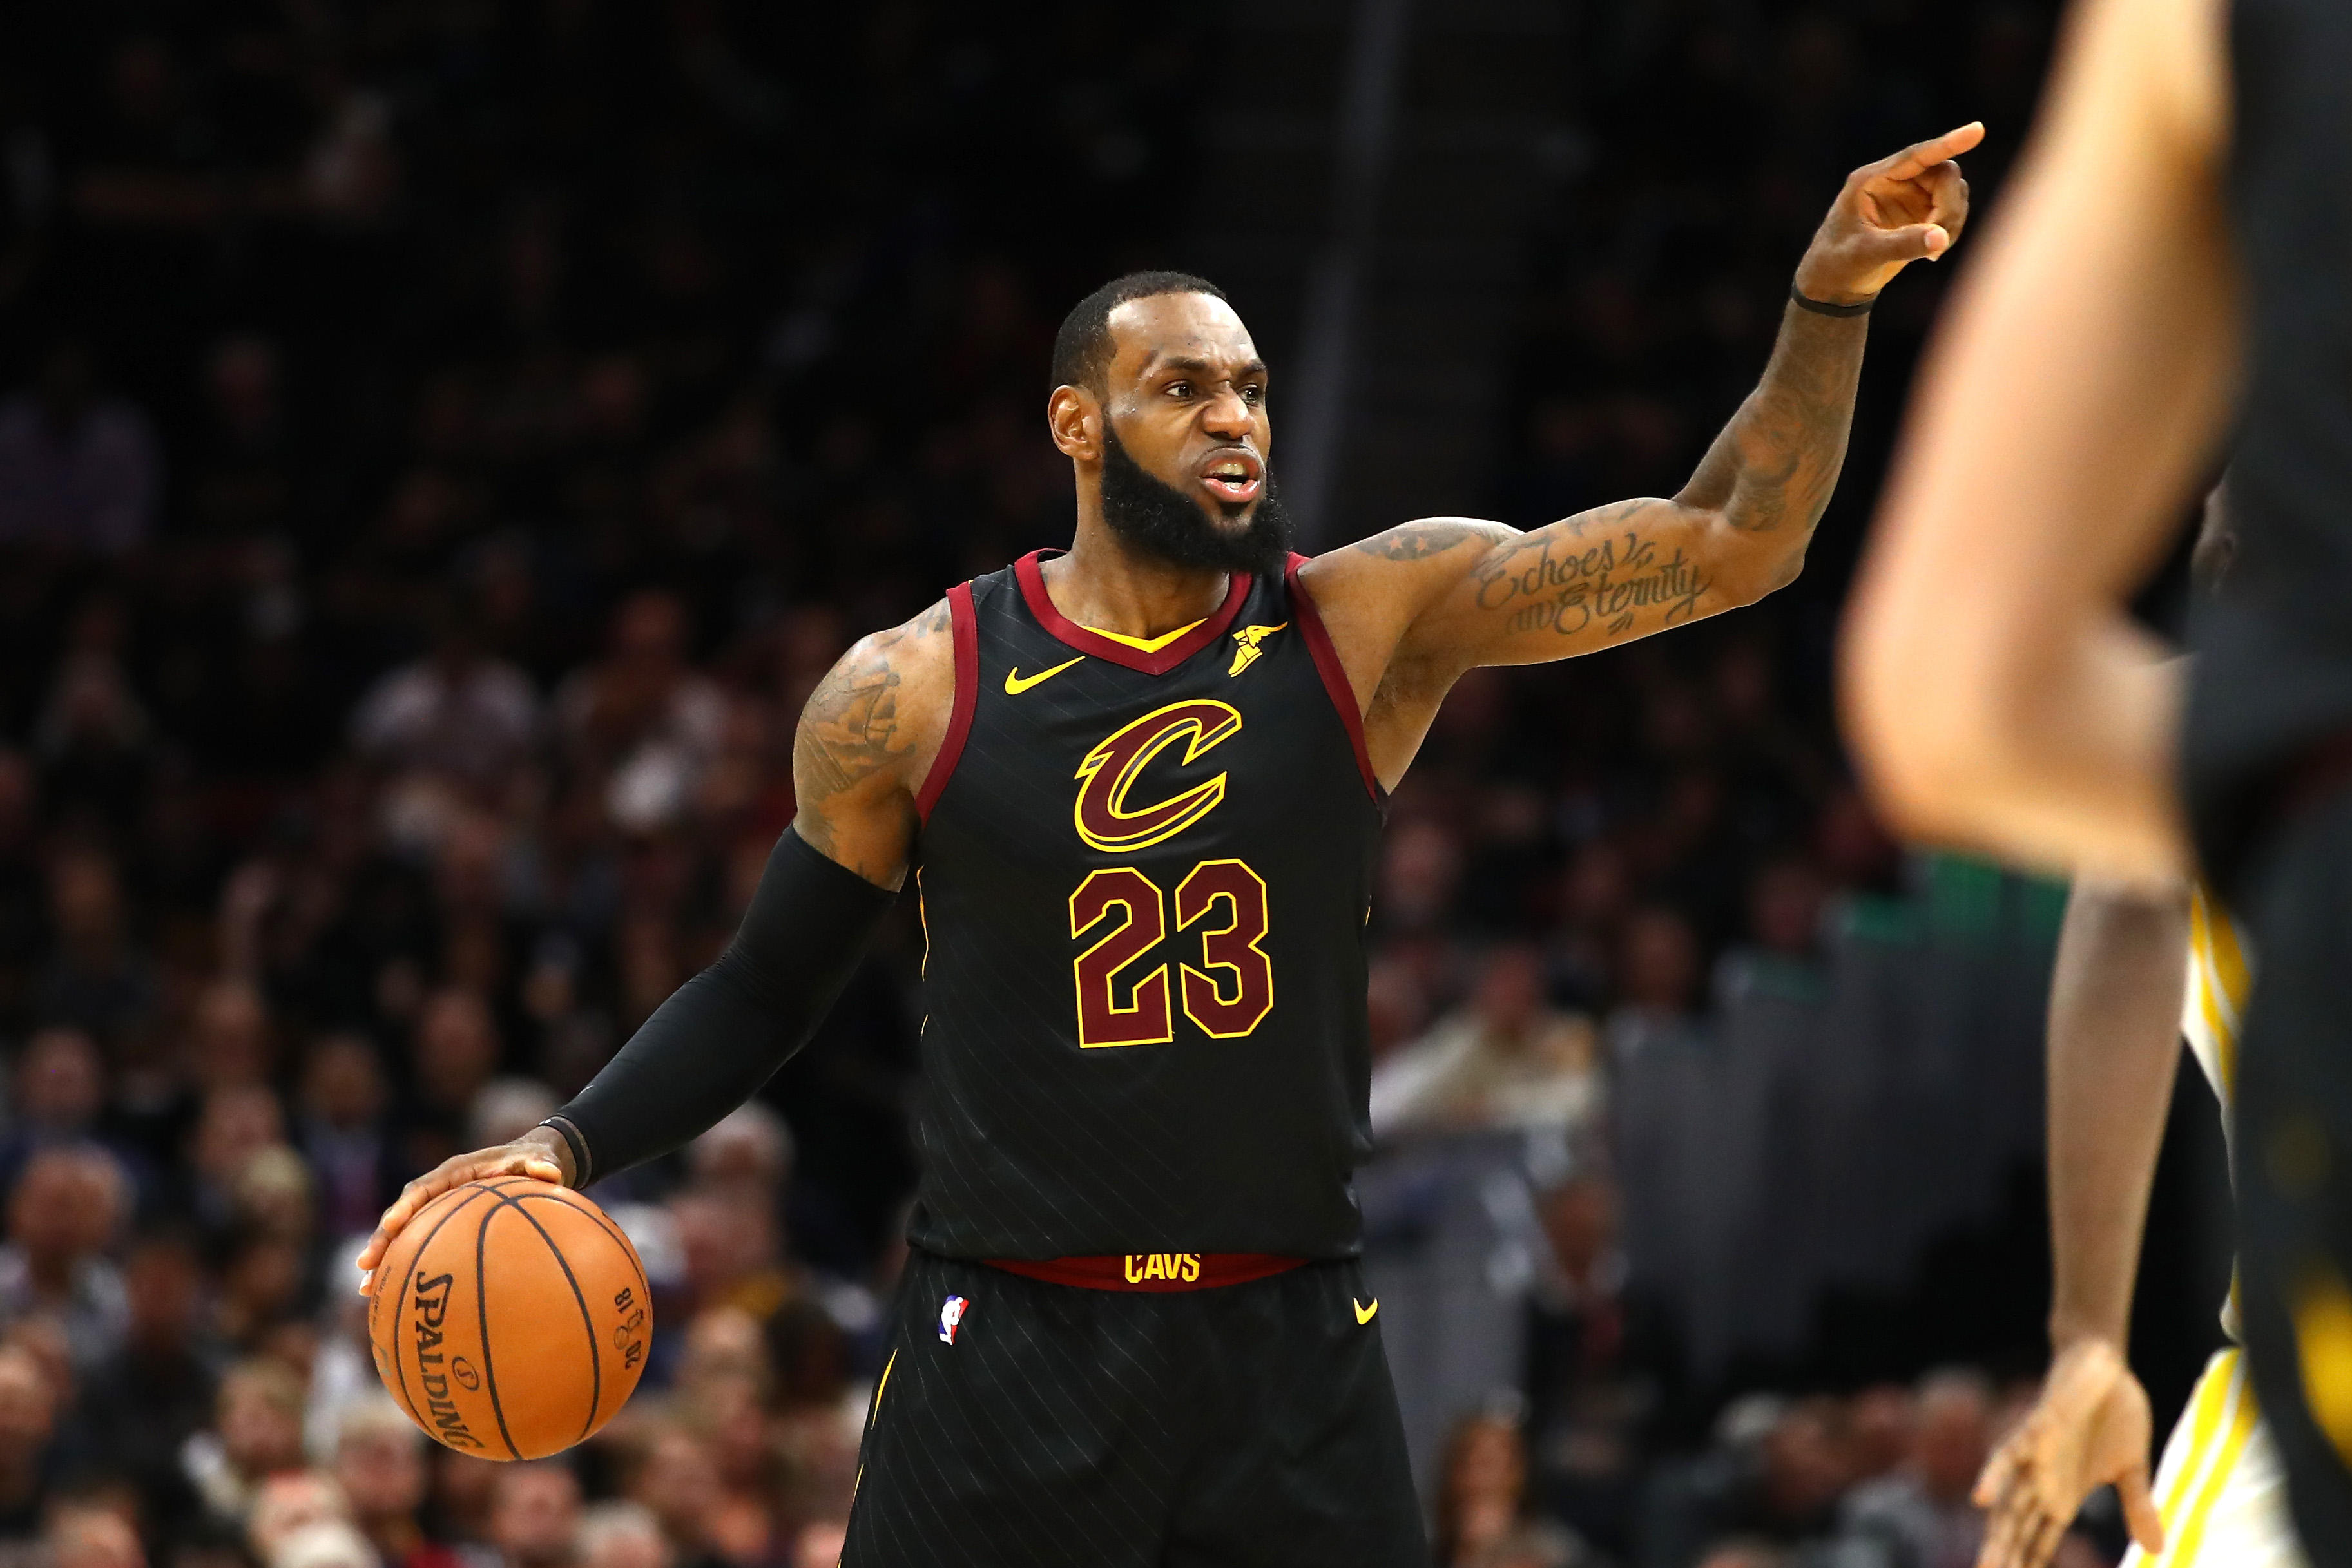 LeBron James facing last game with Cleveland Cavaliers after Golden